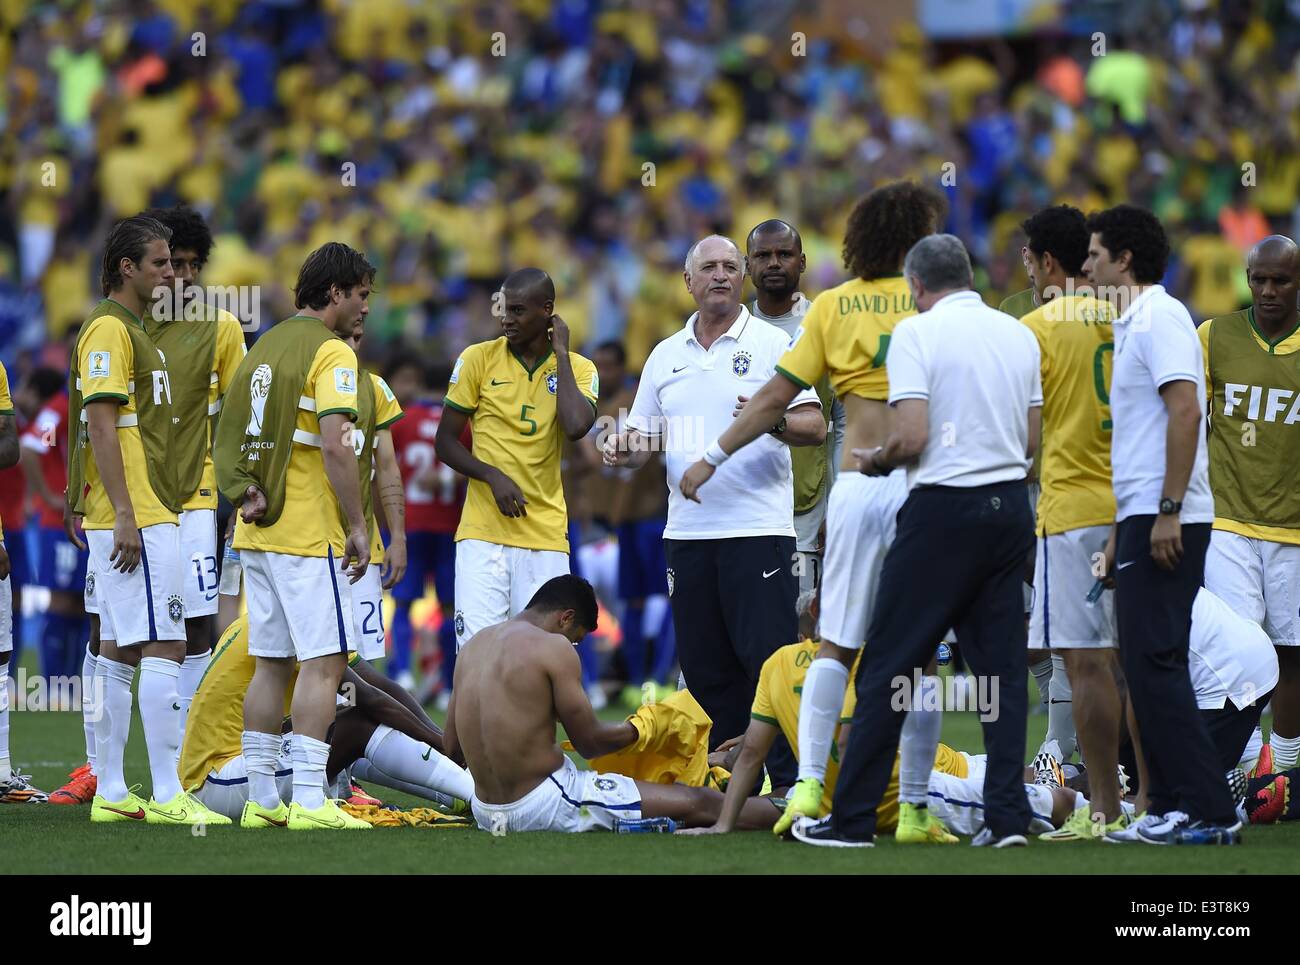 Belo Horizonte, Brazil. 28th June, 2014. Brazil's coach Luiz Felipe Scolari (C) speaks with players before the regular time of a Round of 16 match between Brazil and Chile of 2014 FIFA World Cup at the Estadio Mineirao Stadium in Belo Horizonte, Brazil, on June 28, 2014. Credit:  Liu Dawei/Xinhua/Alamy Live News Stock Photo